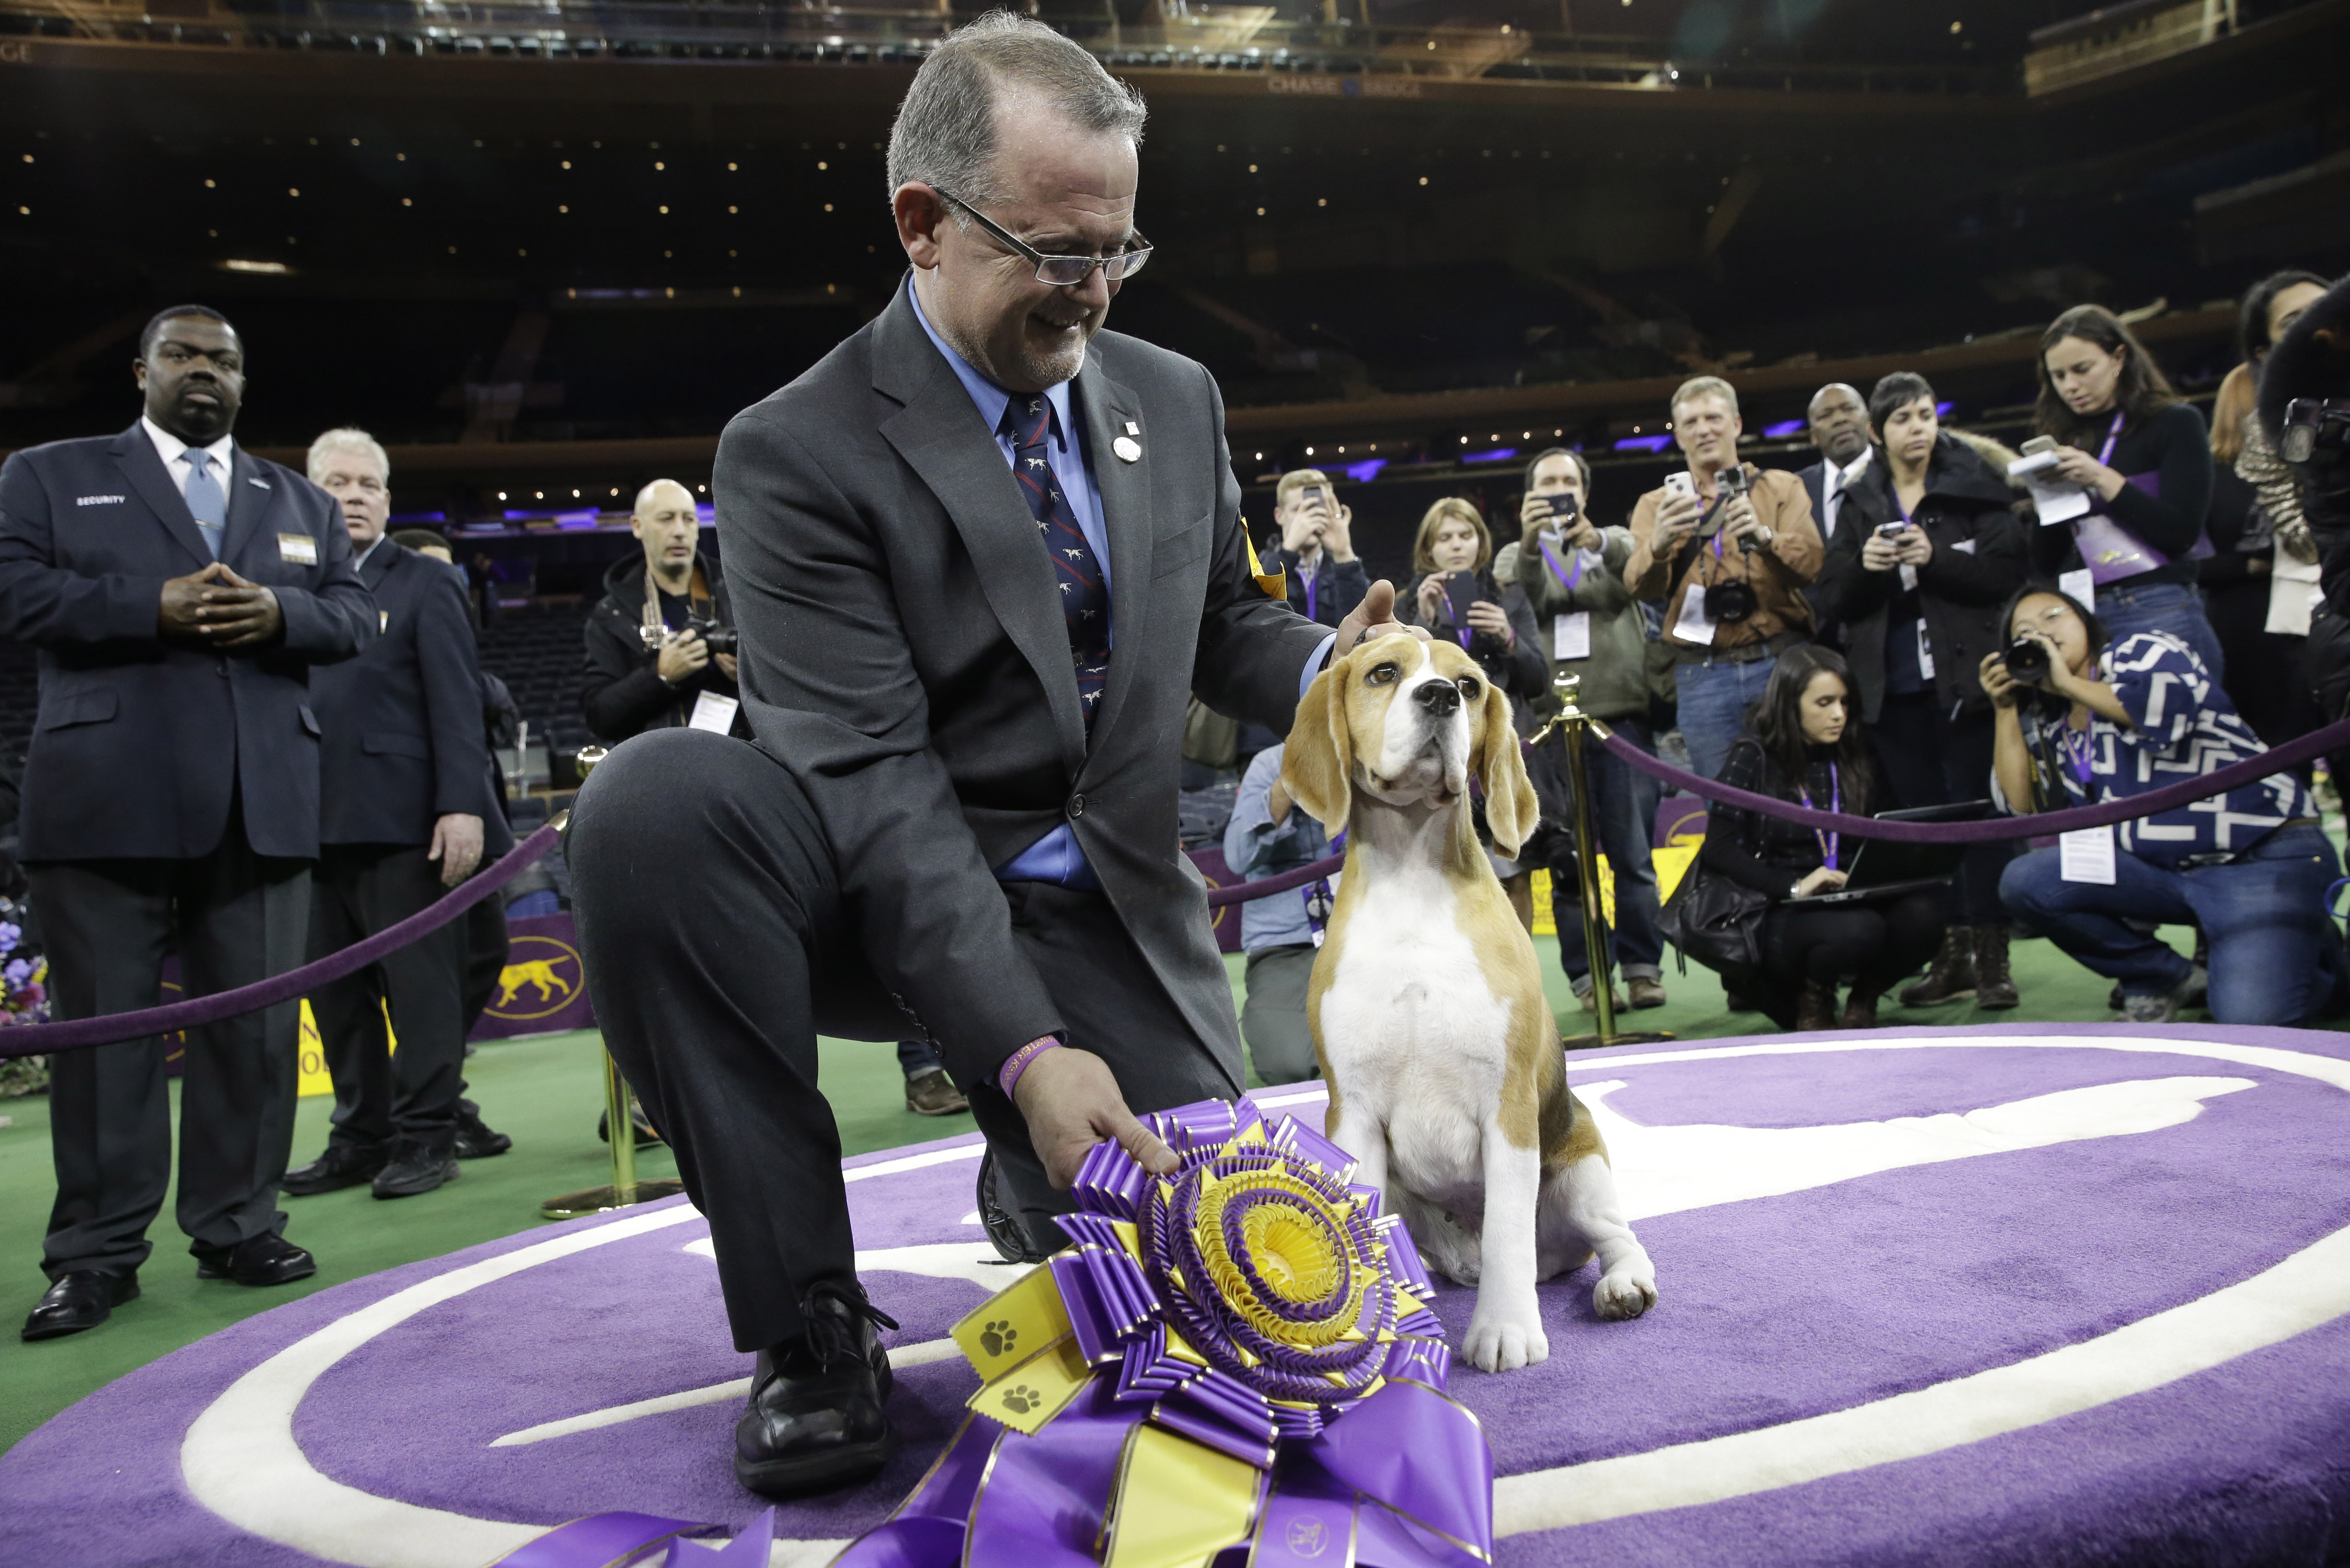 Westminster Dog Show 2015 Results: Best of Breed Winners and Day 2 Recap | Bleacher Report5163 x 3445